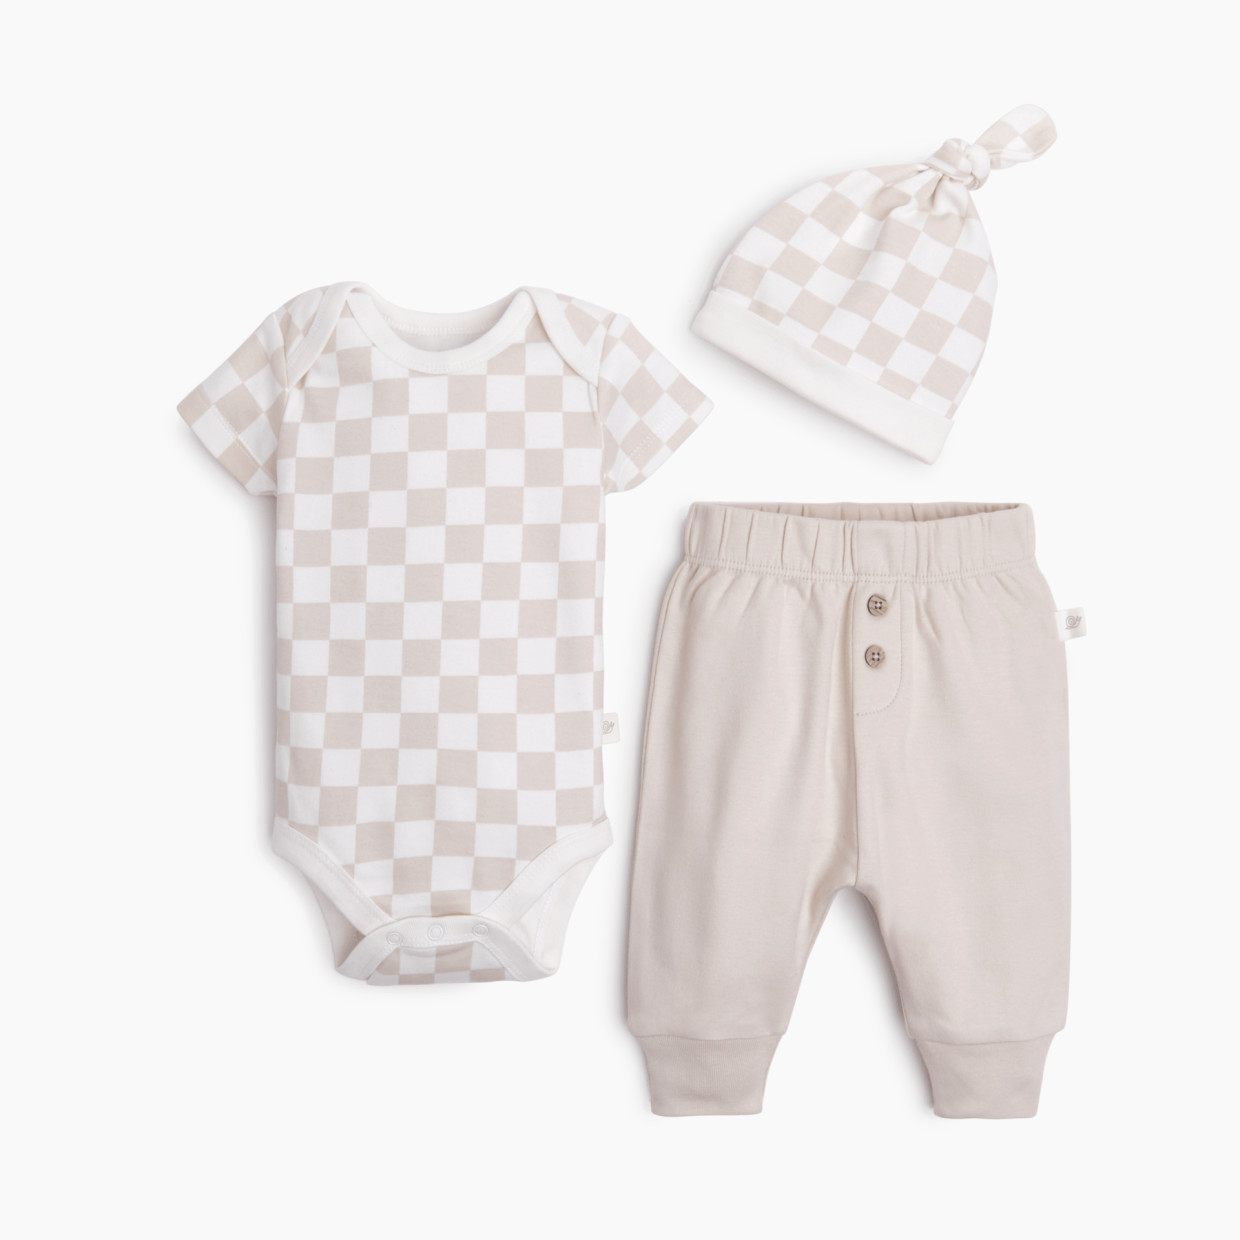 Tiny Kind The Outfit 3 Piece Set - Skate Check, 6-9 M.